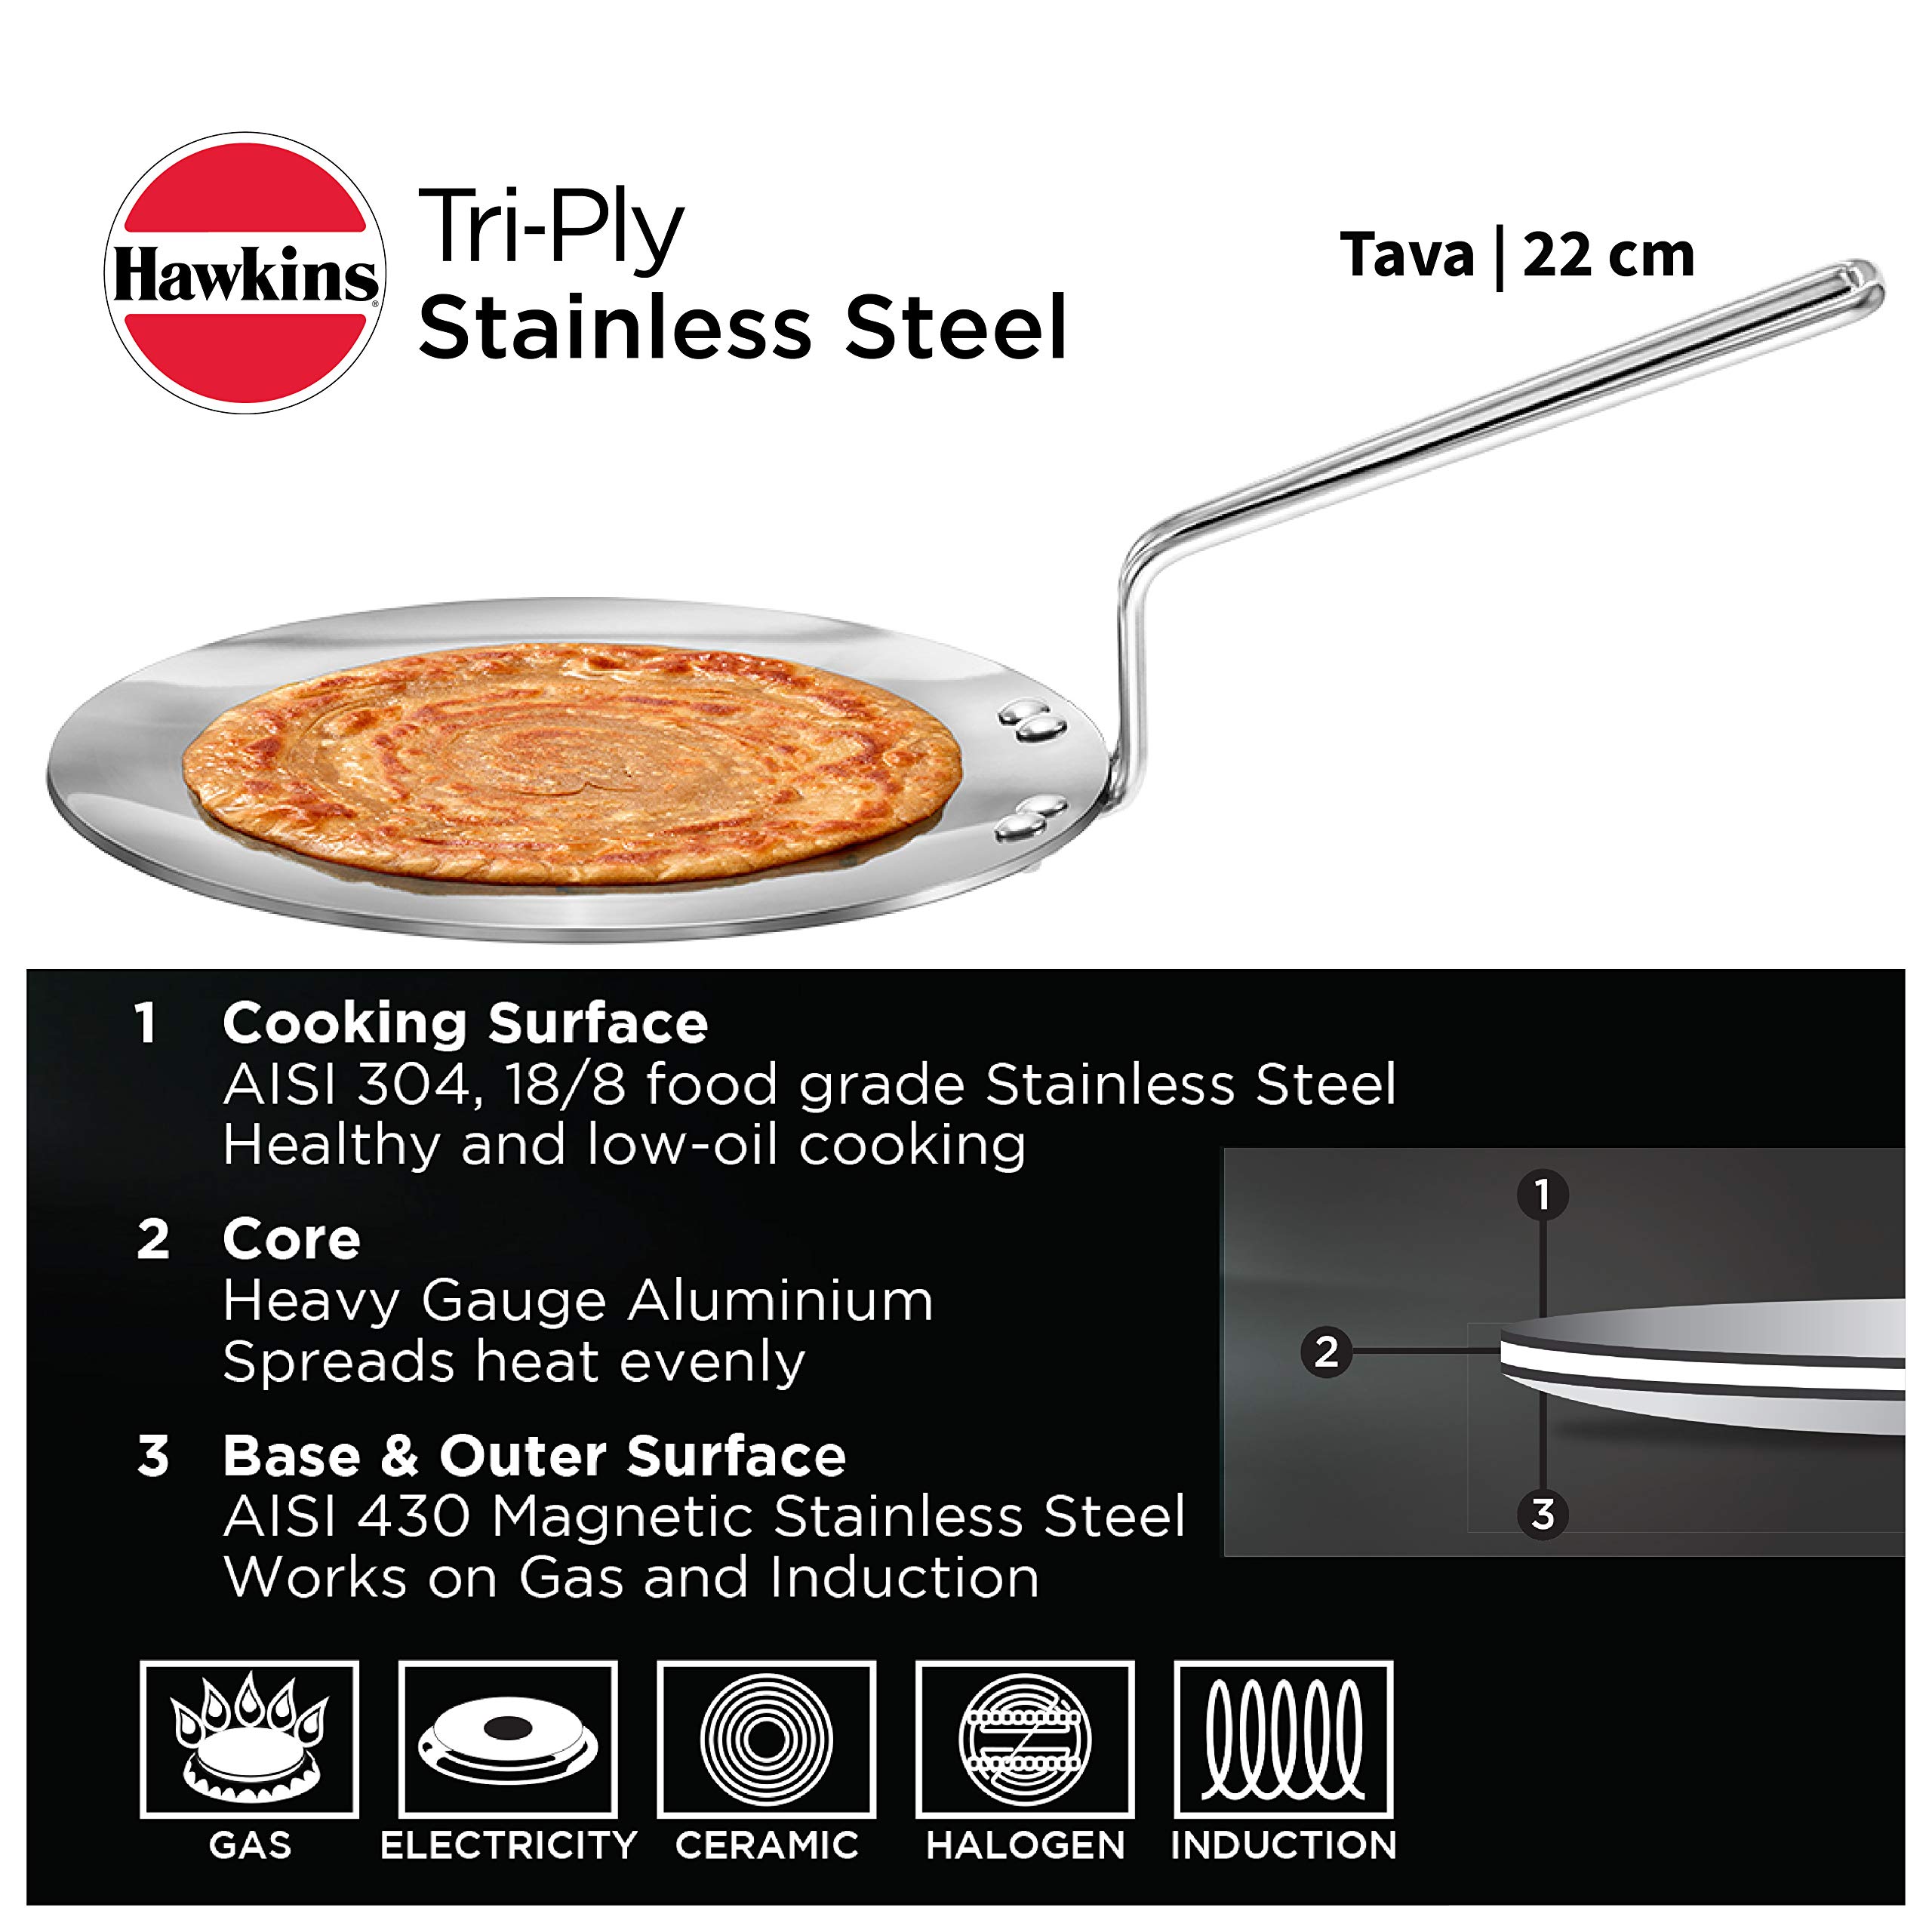 Hawkins 22 cm Tava, Triply Stainless Steel Tawa with Stainless Steel Handle, Induction Tawa, Silver (SSTV22)